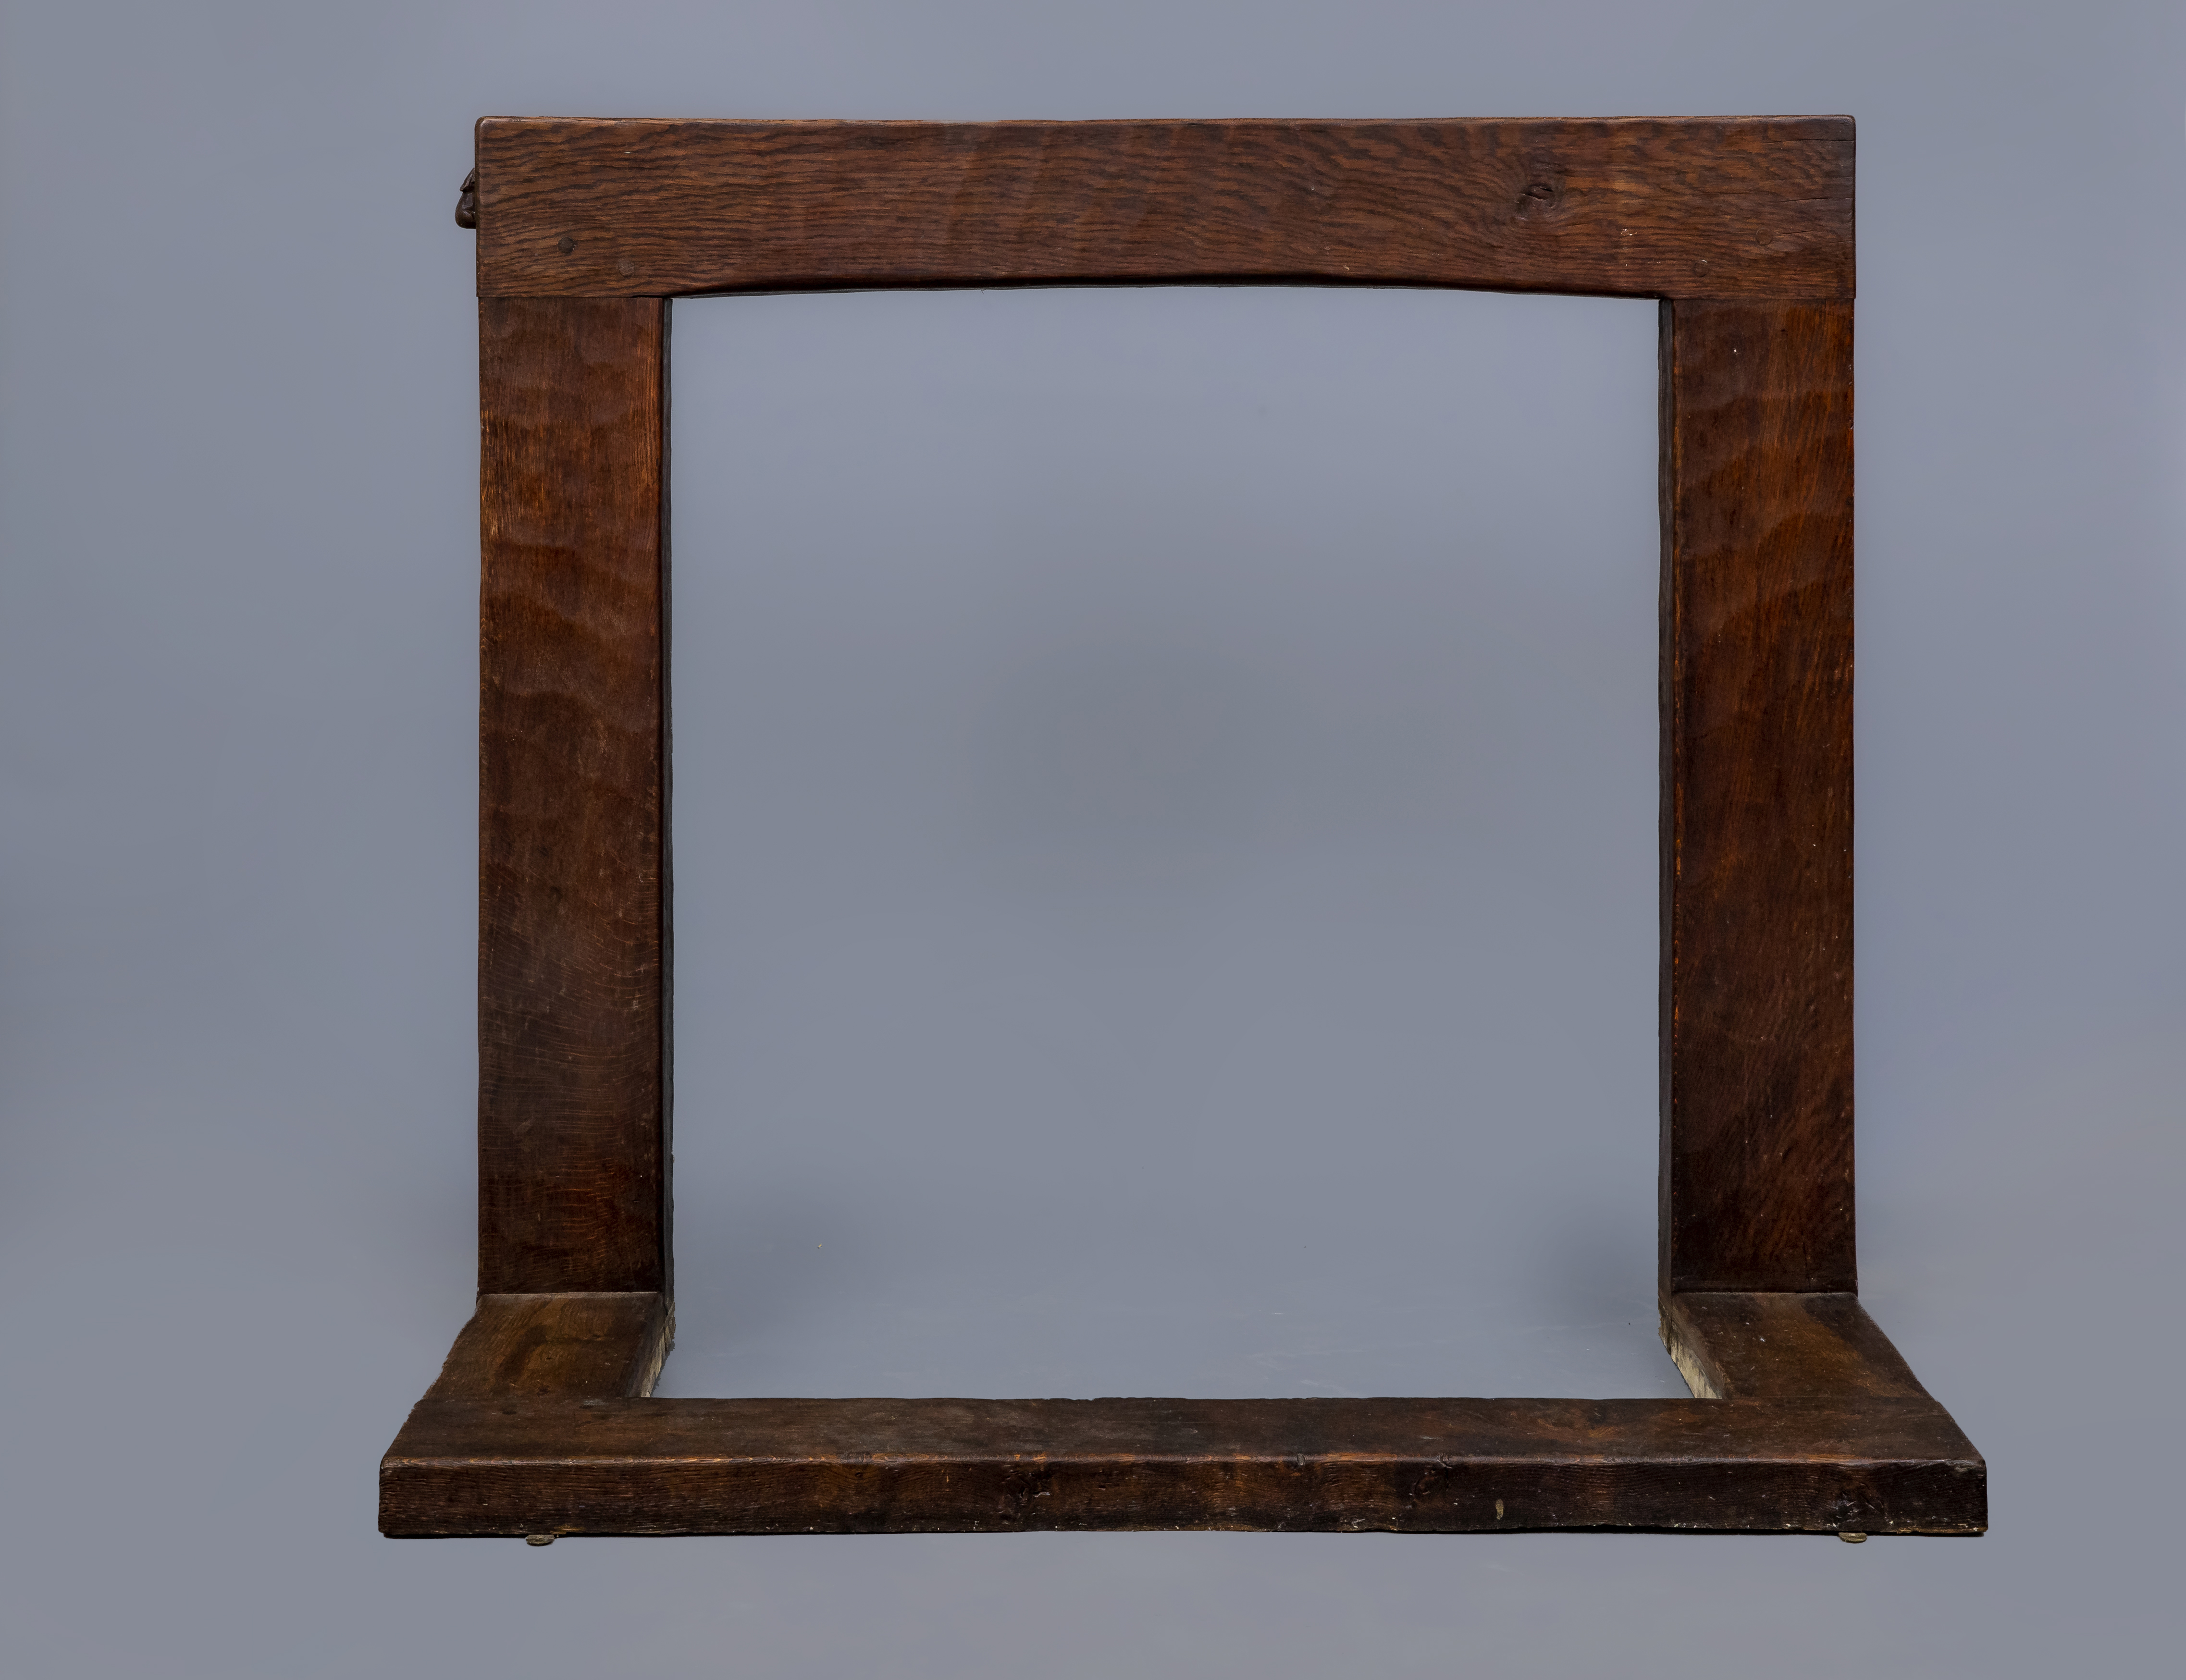 A ROBERT THOMPSON ADZED OAK FIRE SURROUND, c.1930's, of plain square section with mildly arched